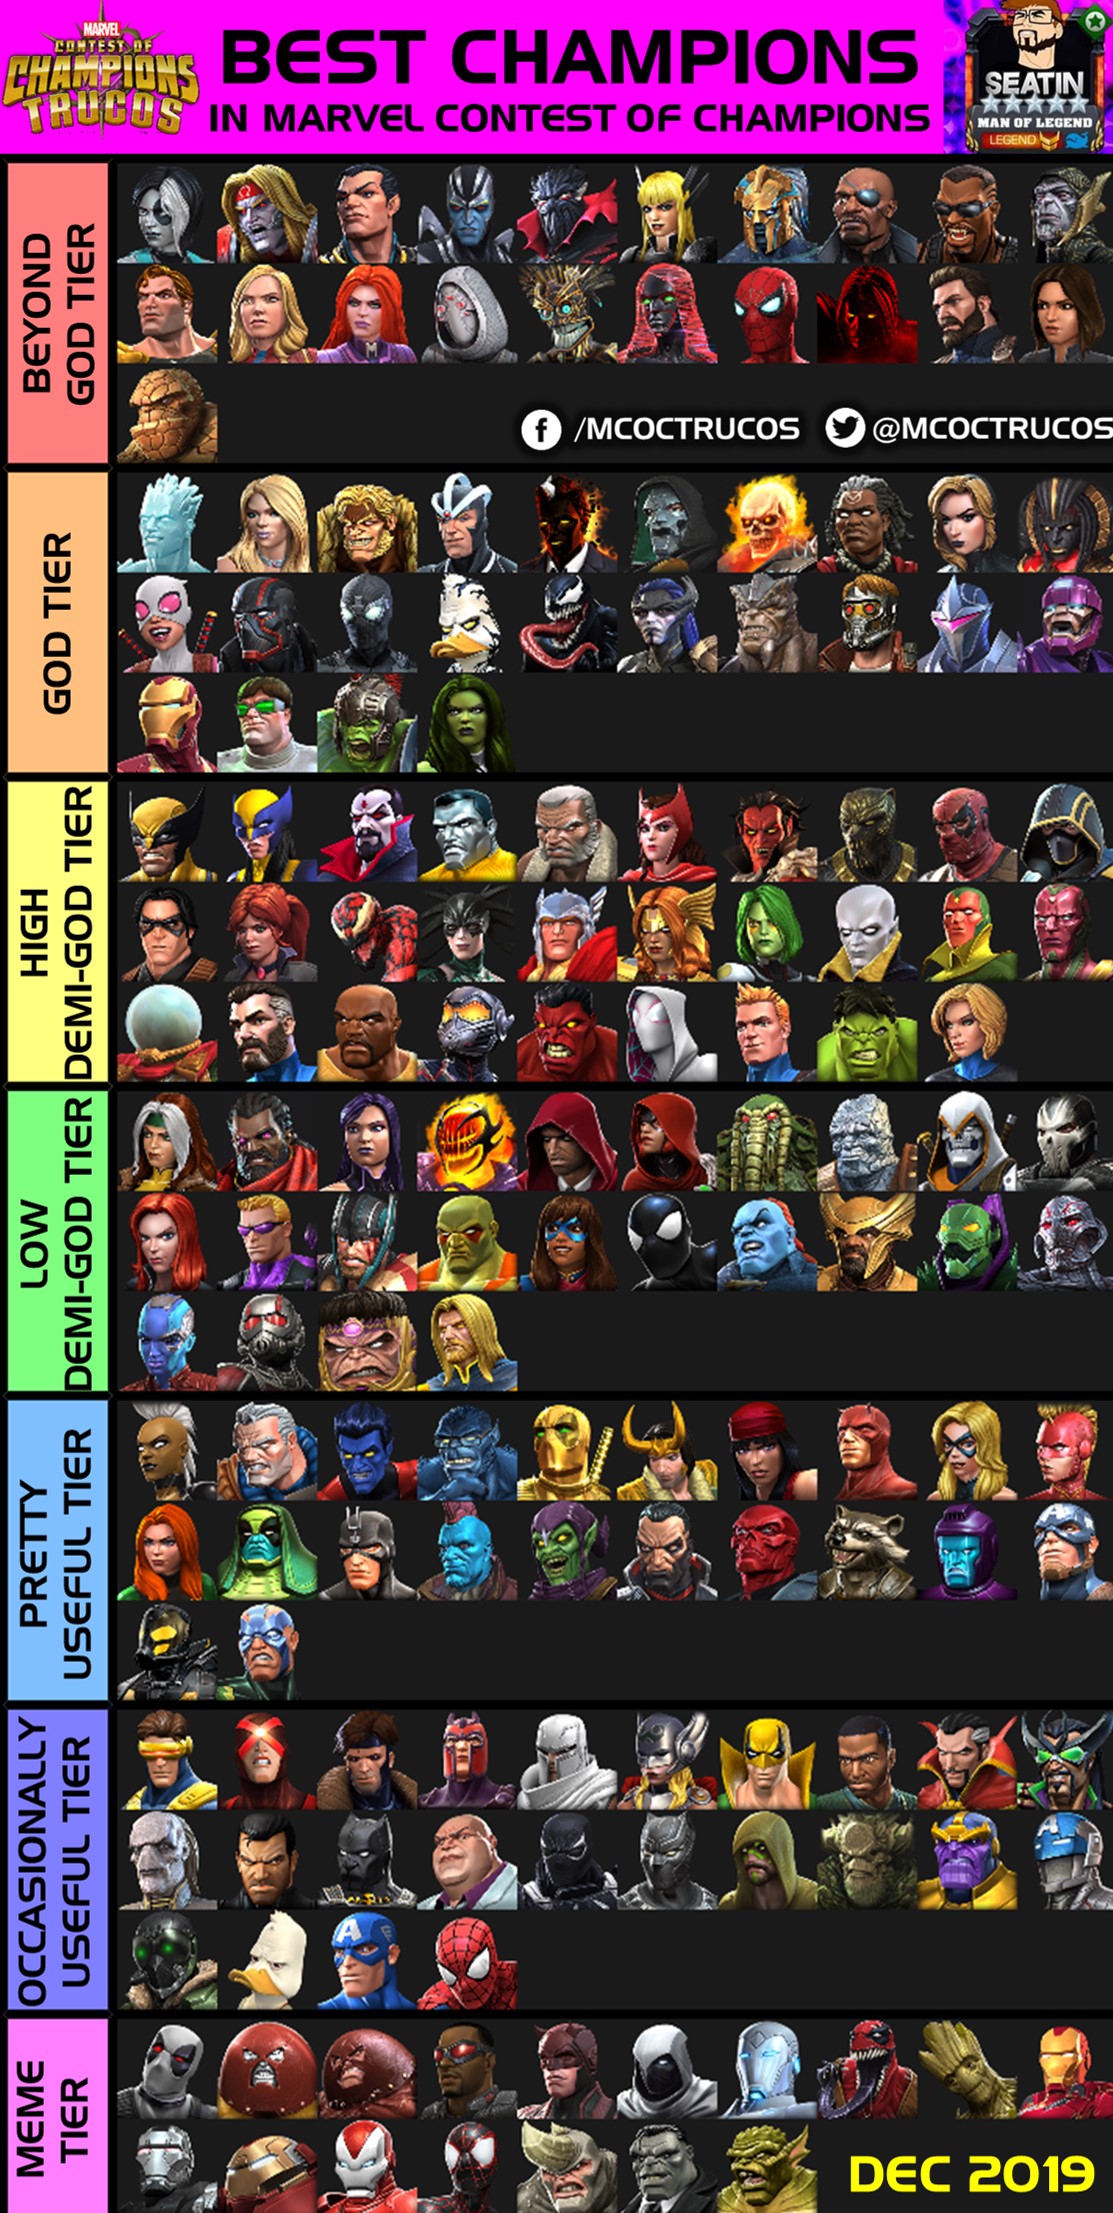 Marvel Contest of Champions tier list - The best (and worst) characters